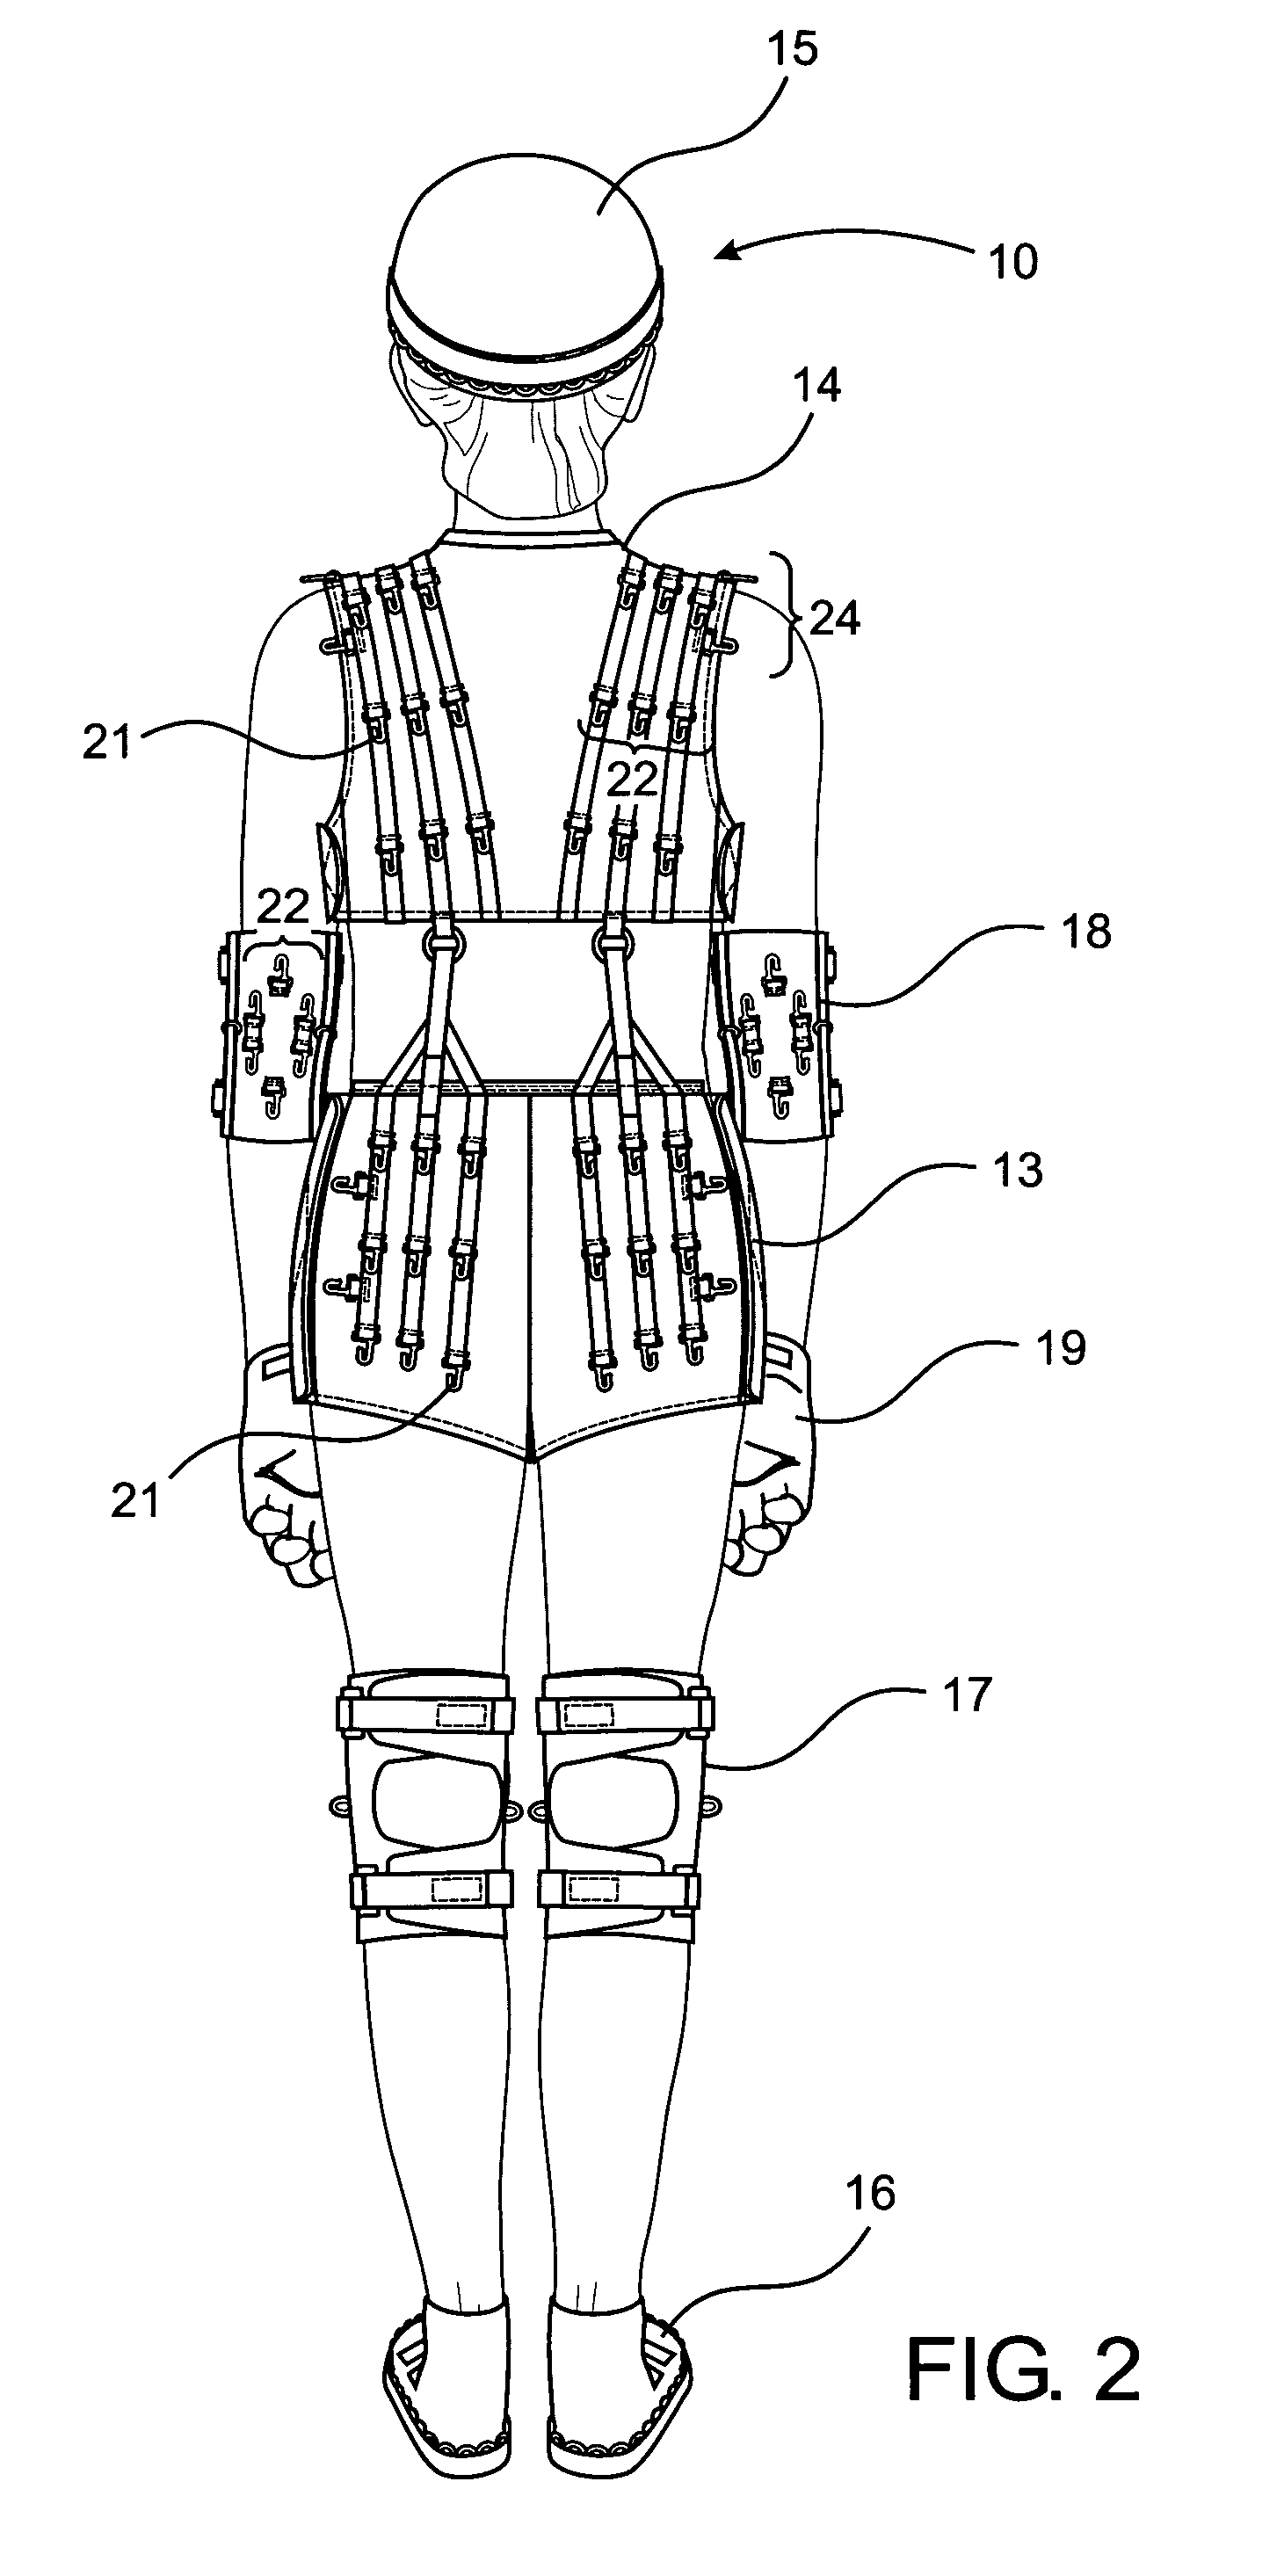 Joint alignment and compression assembly and method for performing a rehabilitative treatment regimen